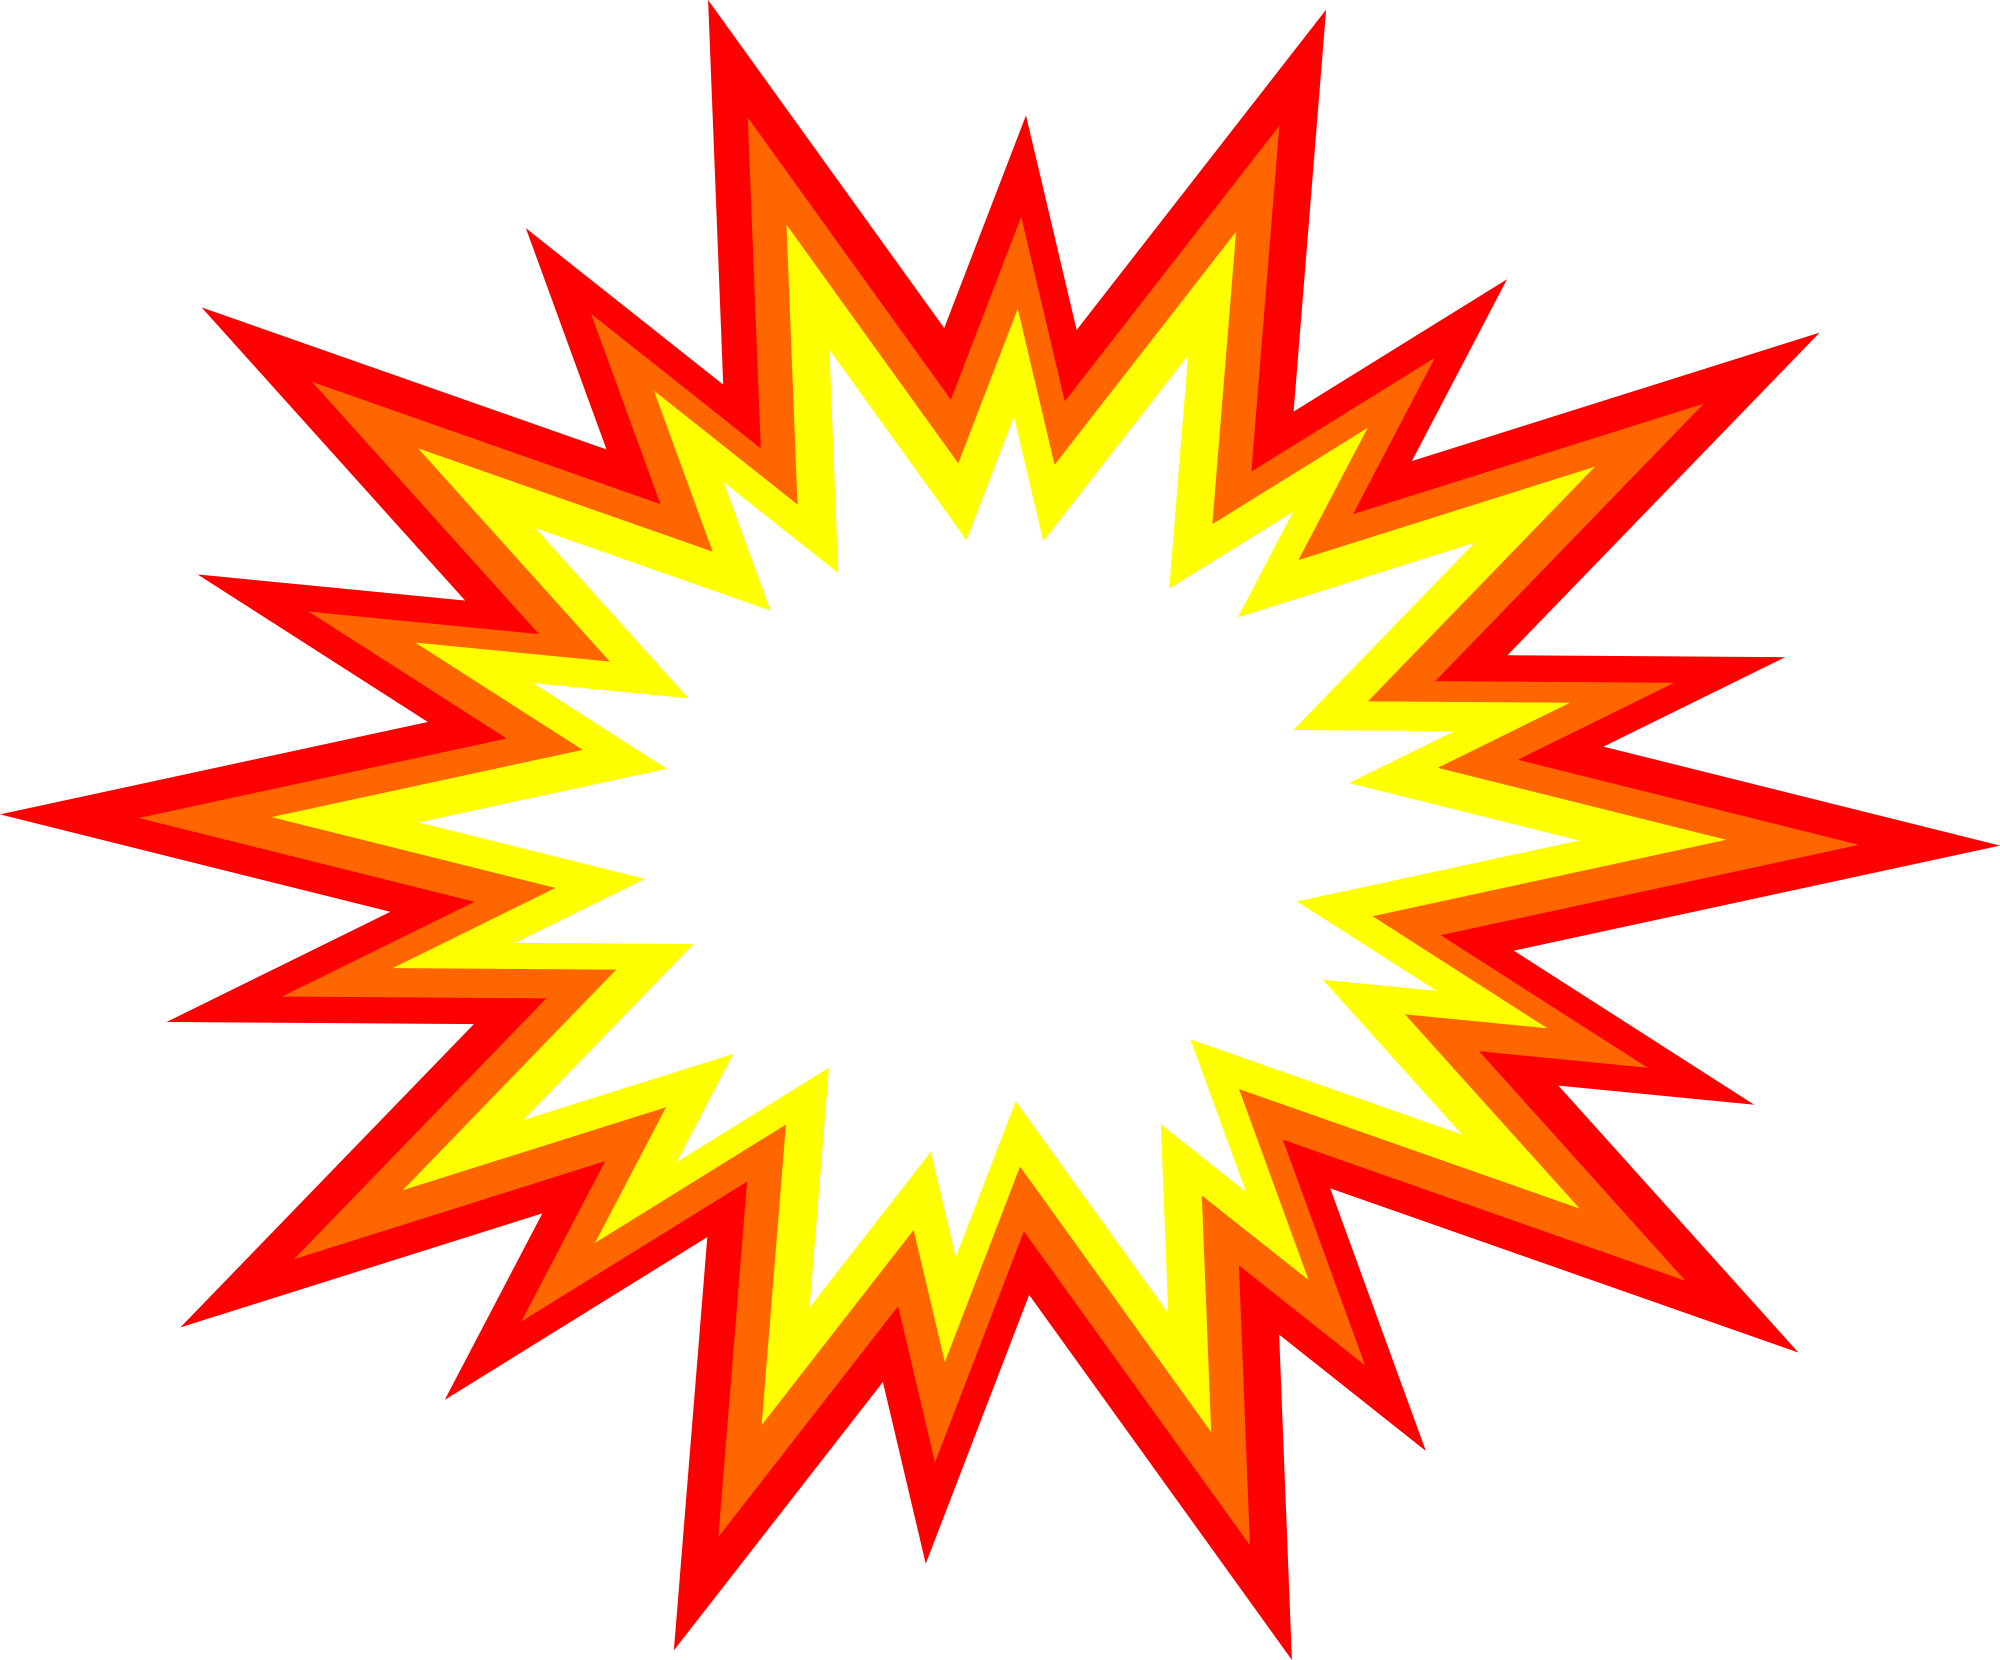 Starburst Explosion PNG Clipart Background